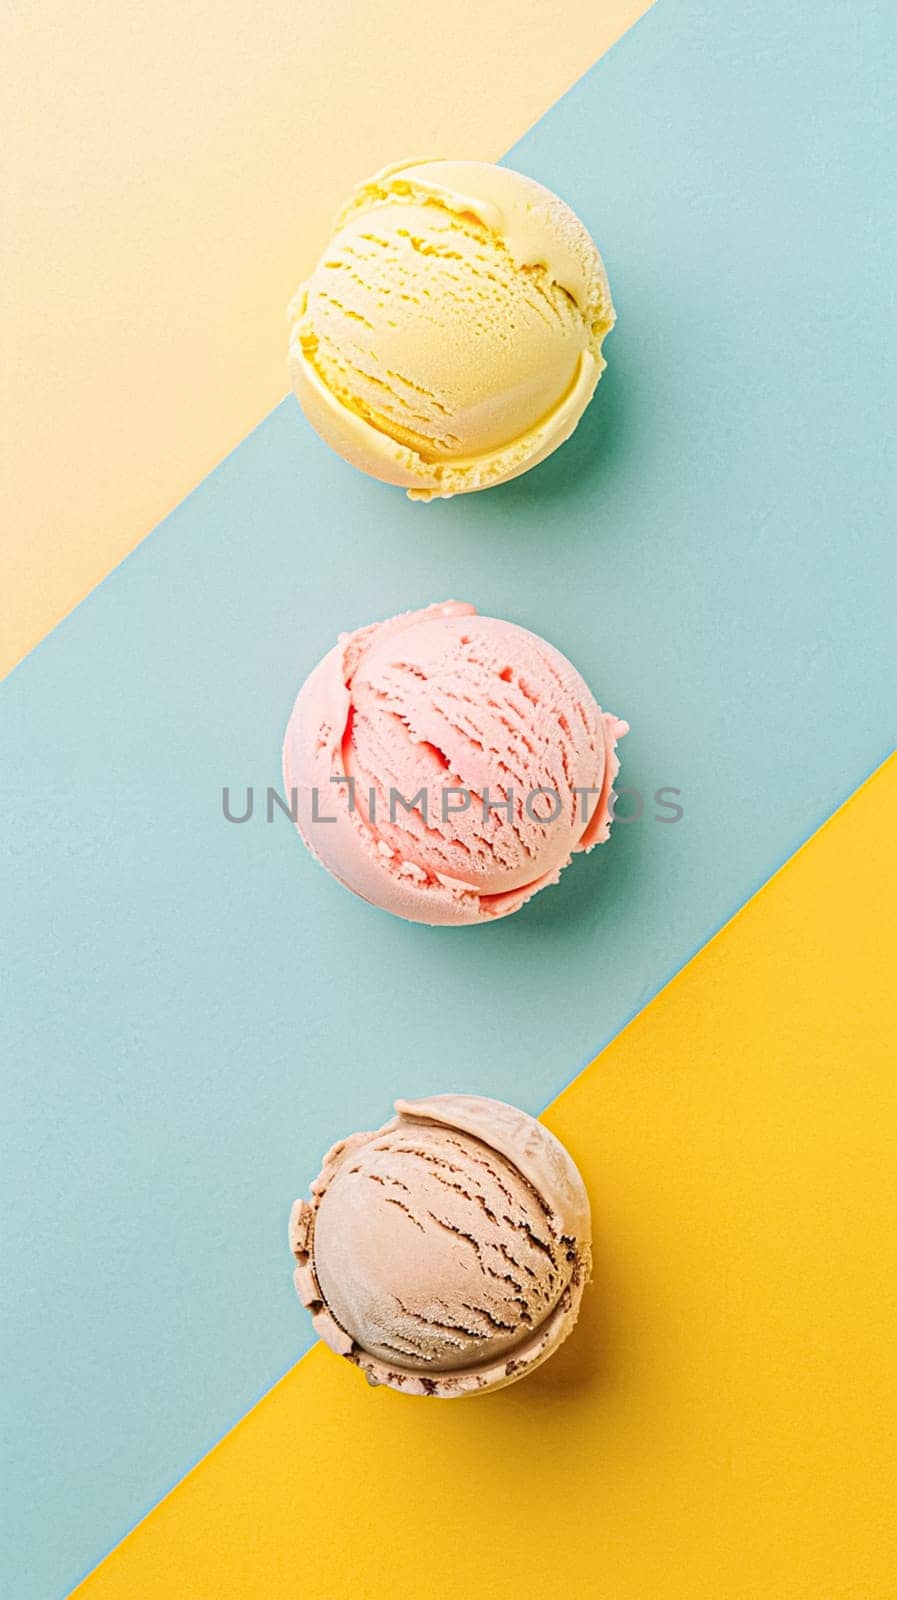 Scoops of ice cream on a colorful background